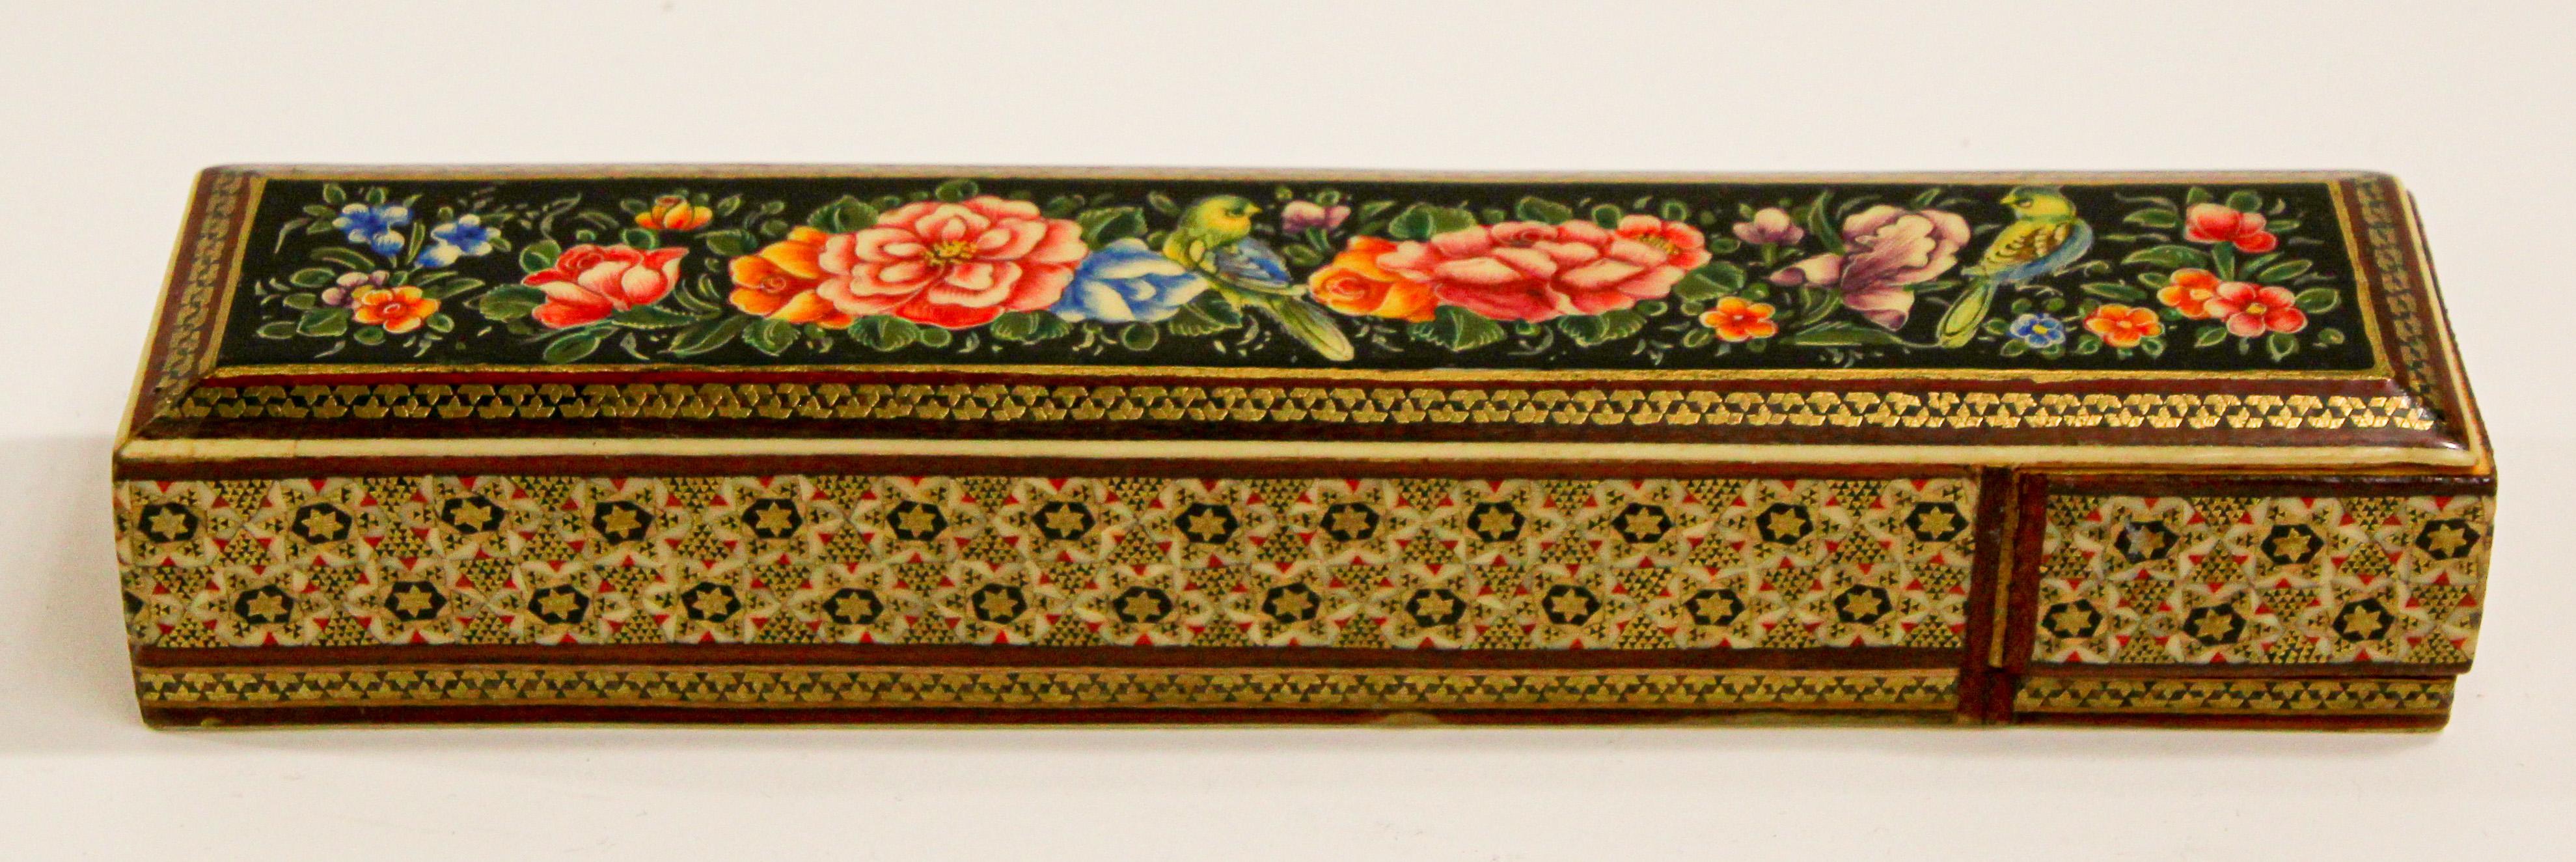 Persian Lacquer Pen Box Hand Painted with Floral Design 1